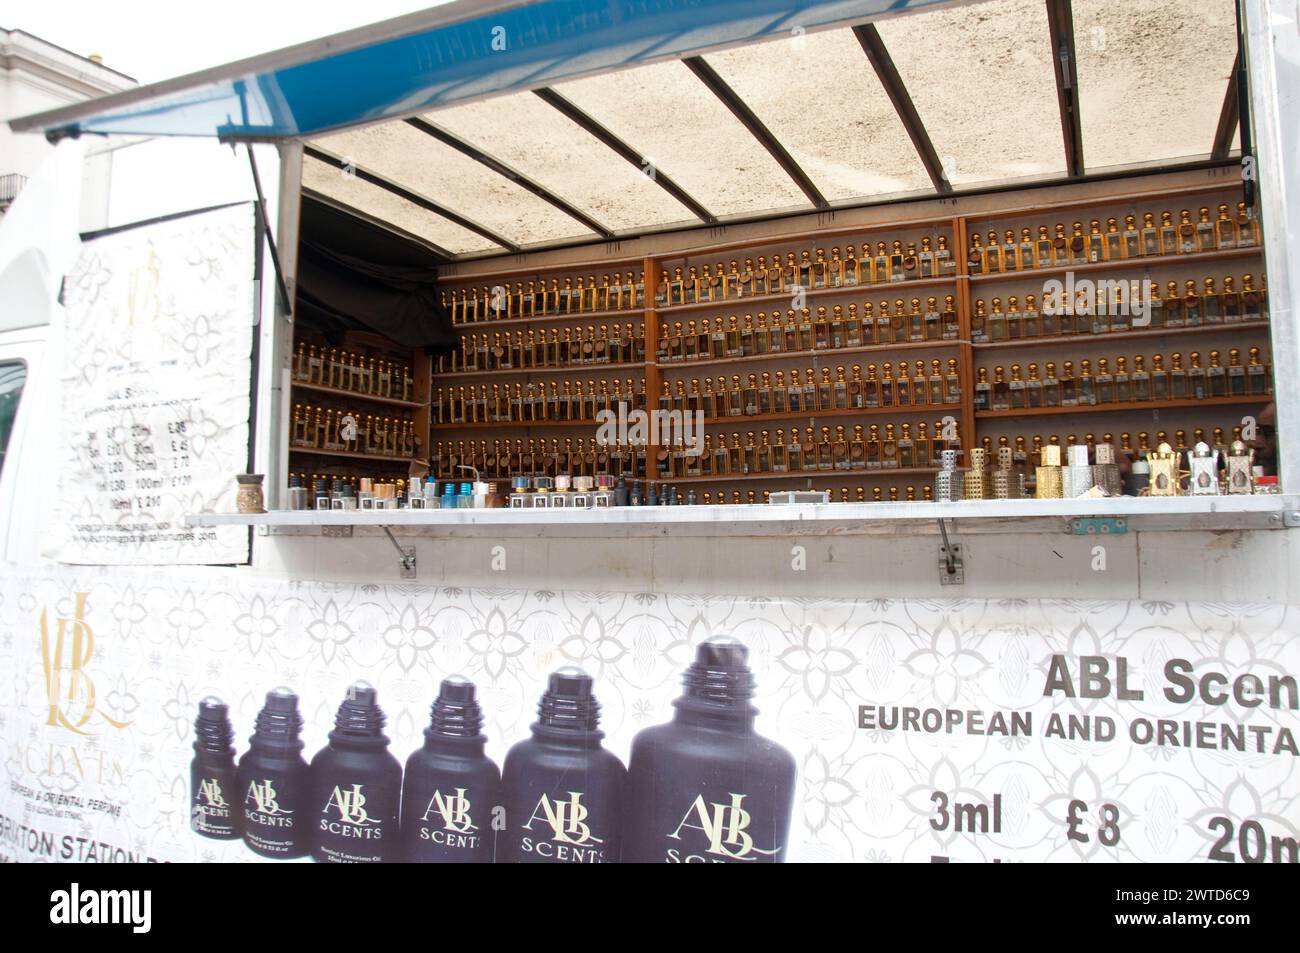 Mobile Perfume Stand in a Caravan; Brixton; London, UK - large supply of small perfume bottles; Stock Photo